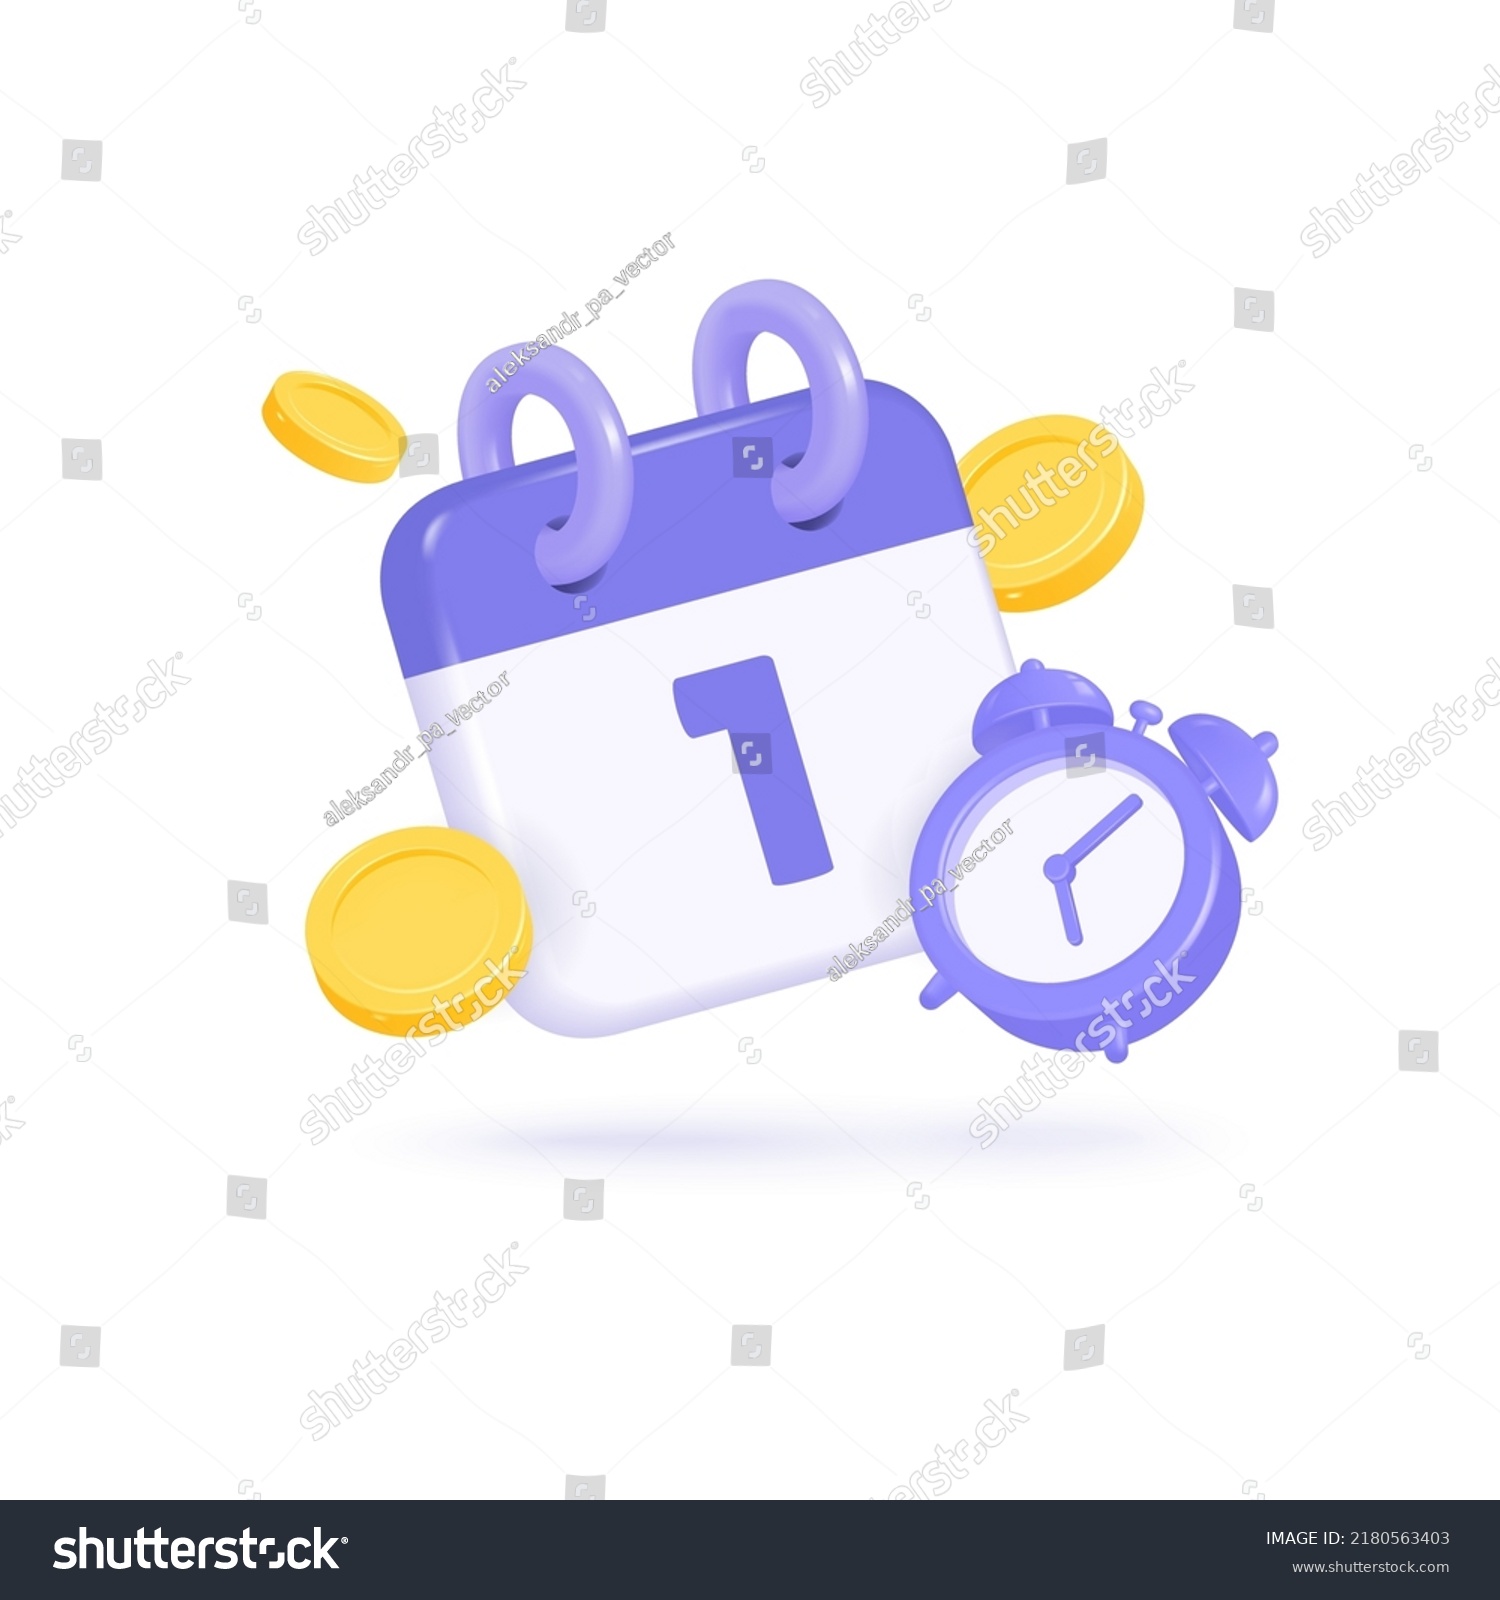 SVG of 3d calendar and alarm clock with gold coins around. the concept of a reminder of timely payment for services. vector illustration in realistic style isolated on white background. svg